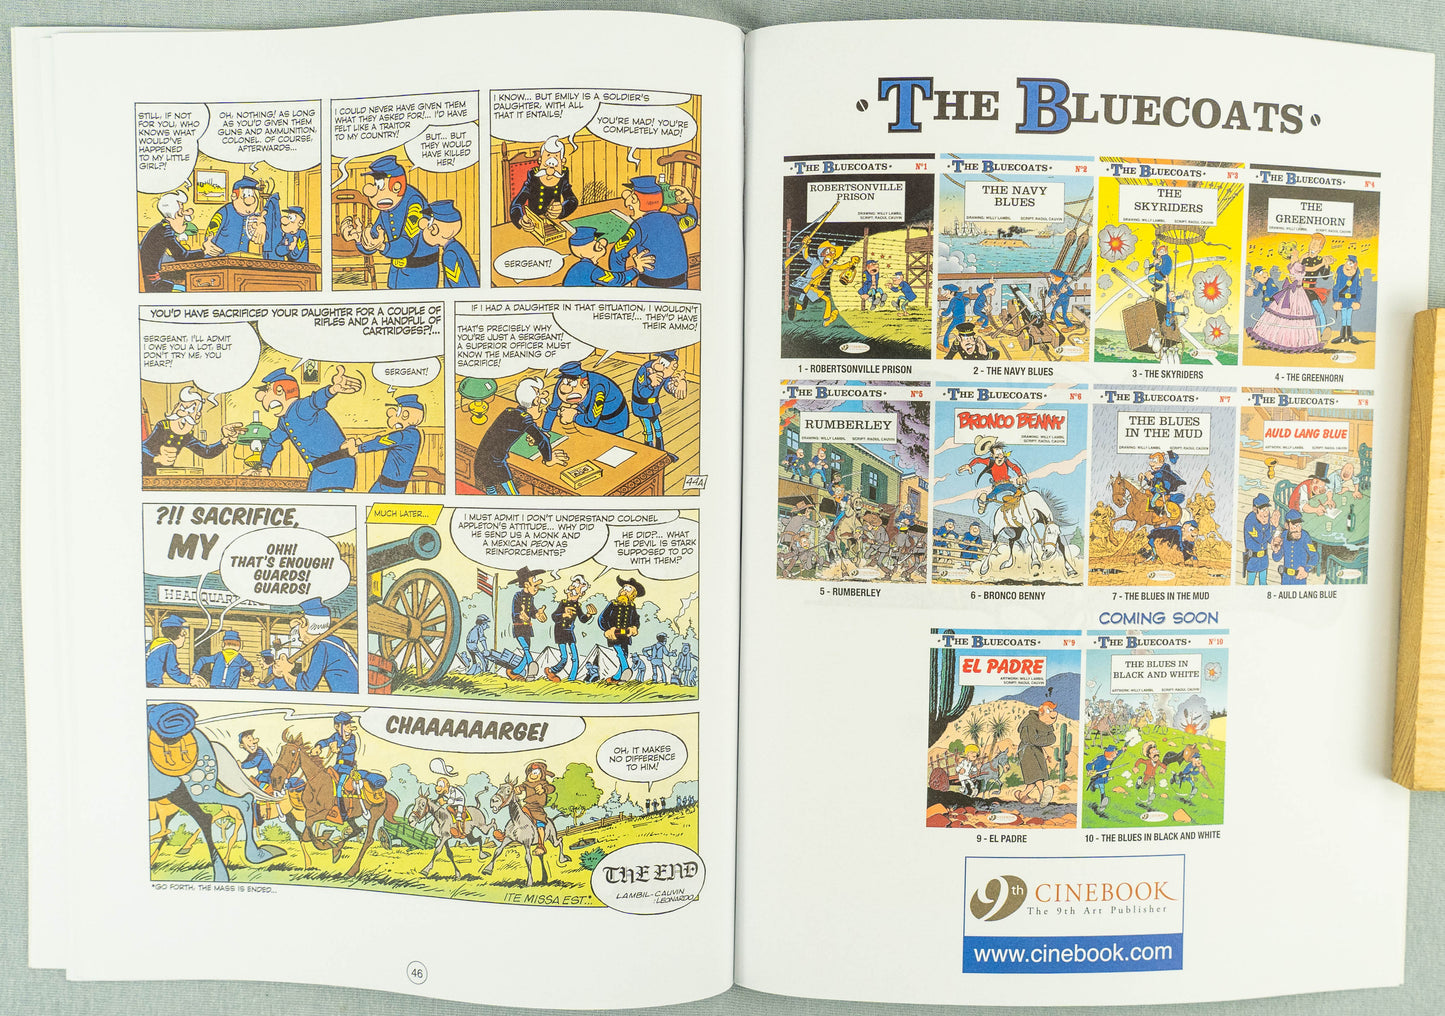 The Bluecoats Volume 9 - El Padre Cinebook Paperback Comic Book by Lambil / Cauvin